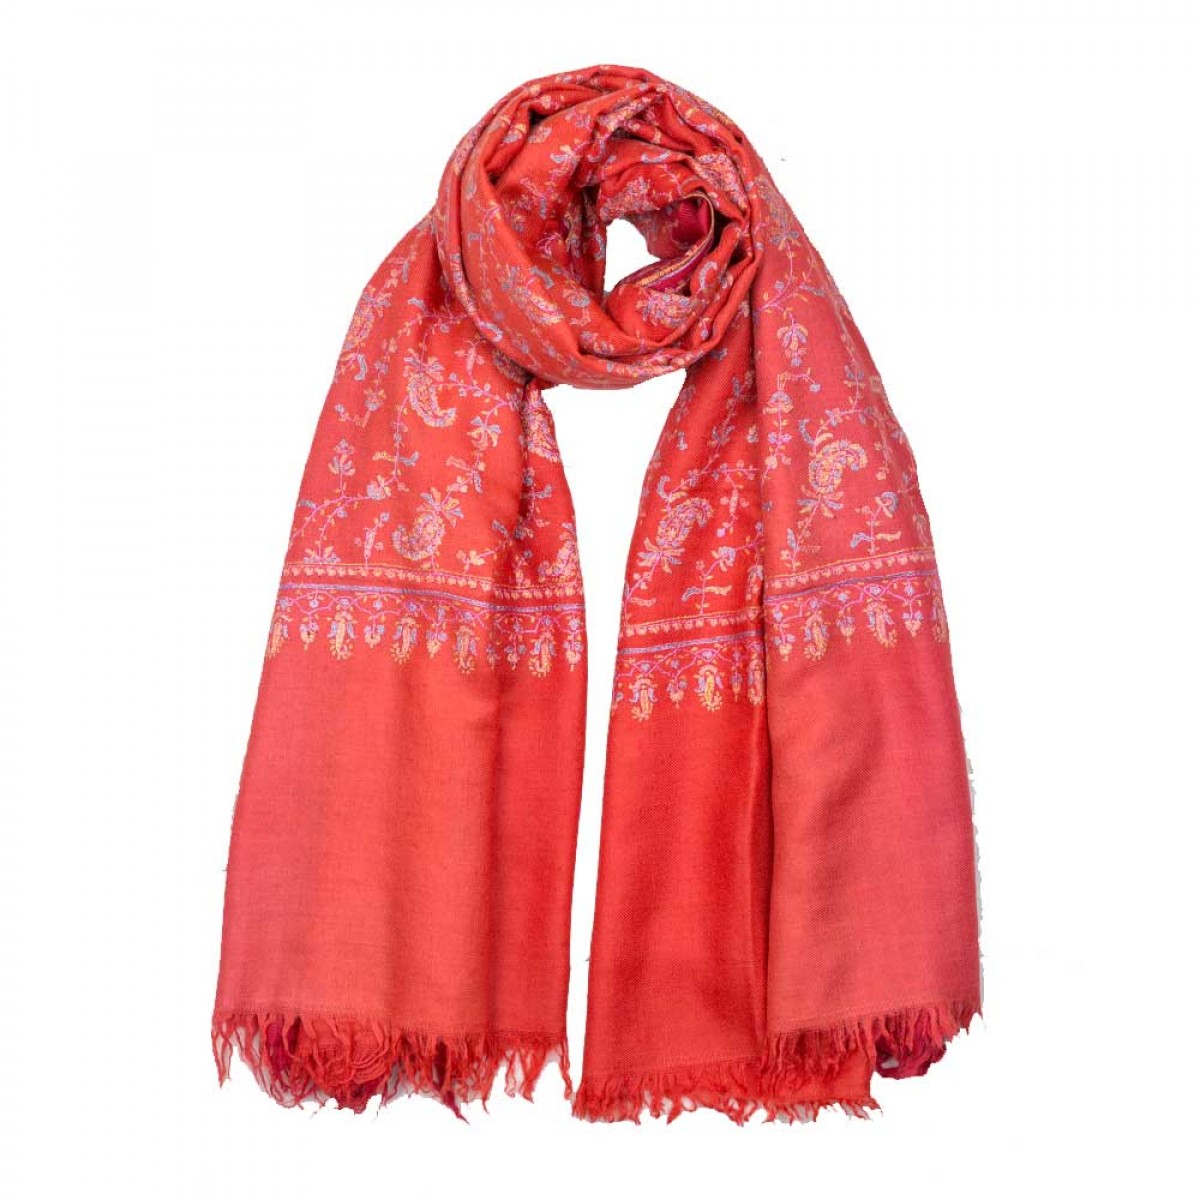 Embroidered Pashmina Shawls - Double Shaded of Red